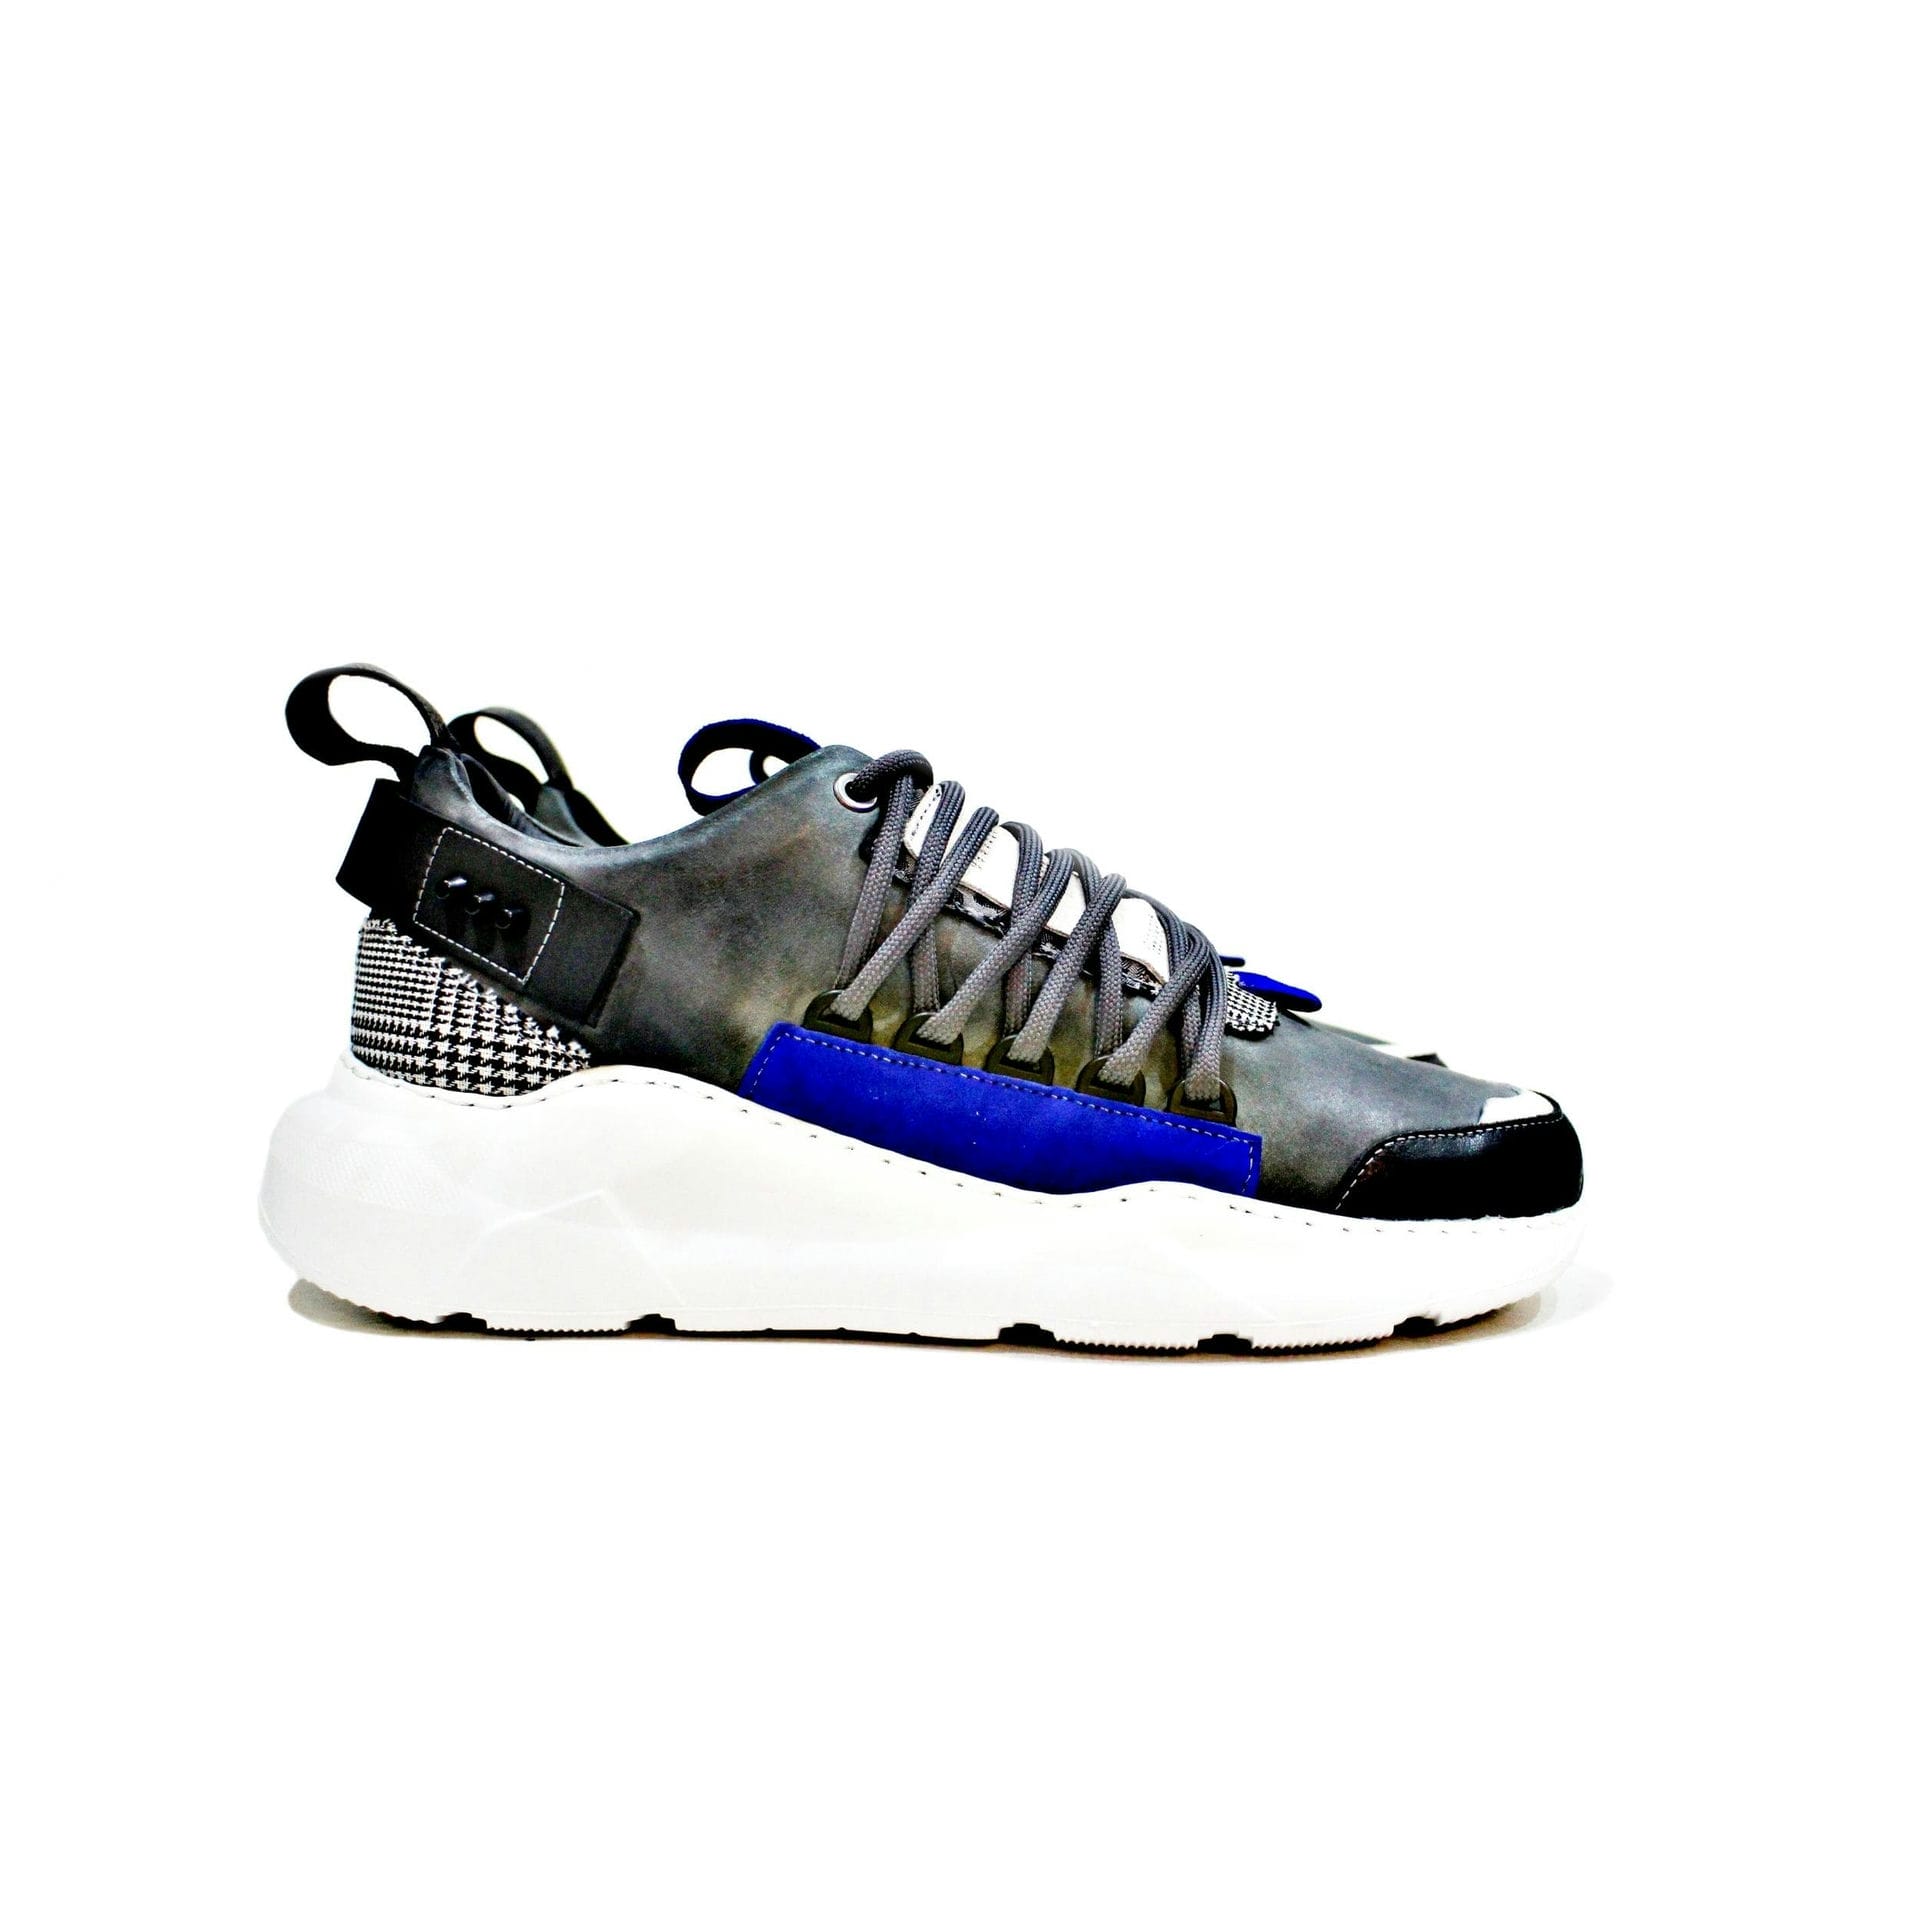 Sneaker consisting of leather, fabric, with suede details, dowels of metal, lined in full leather. “Walk with Pintta”